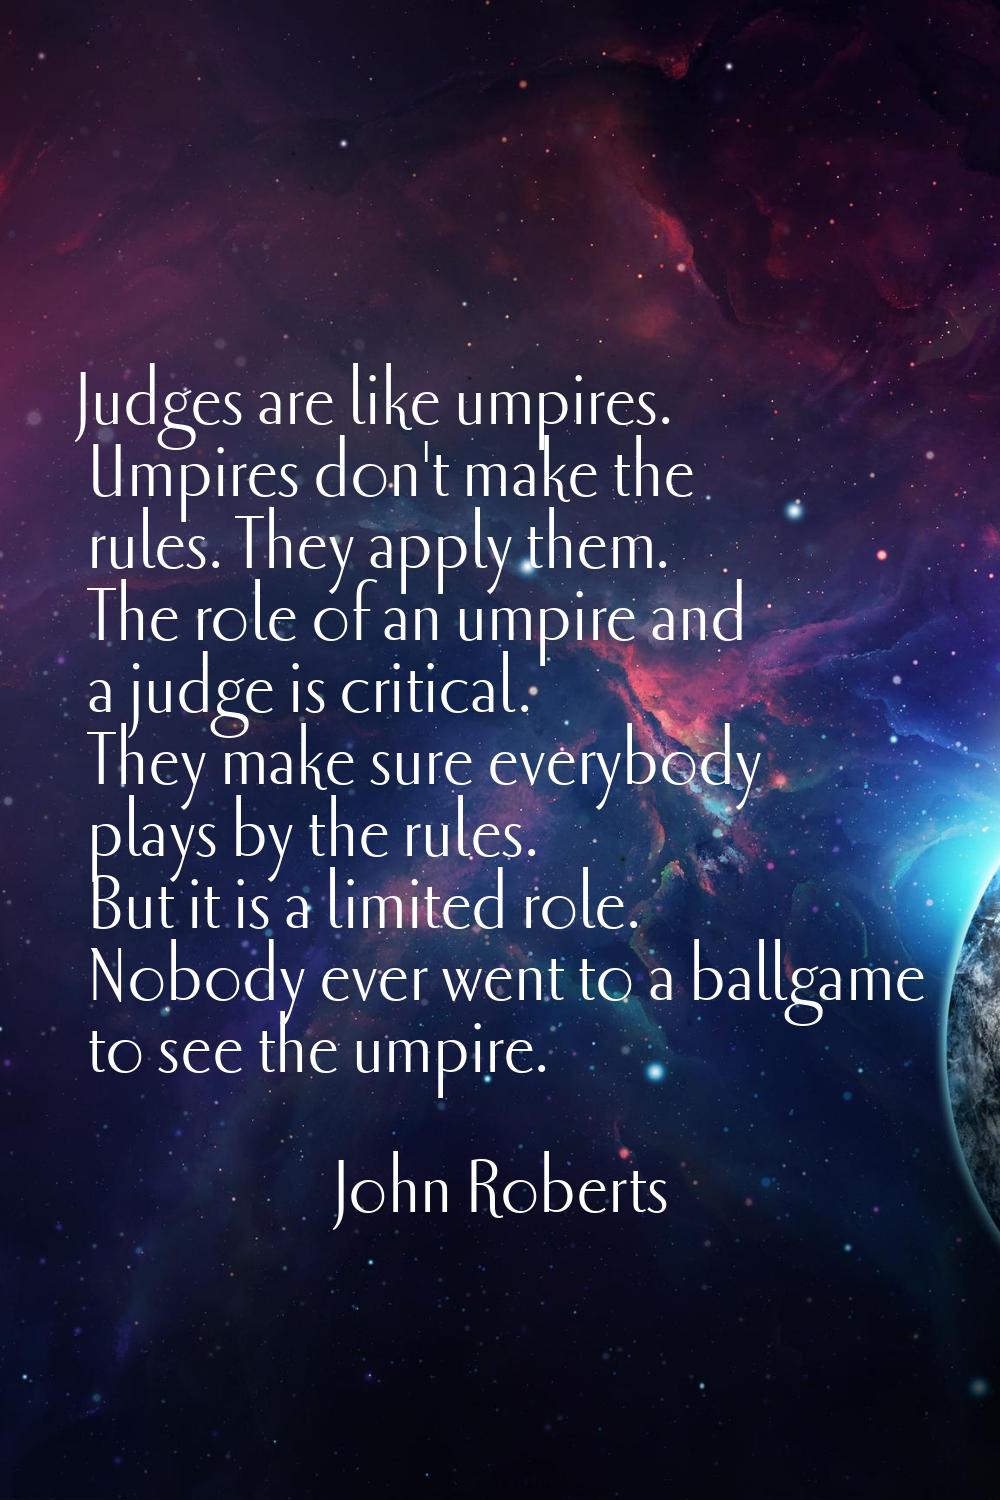 Judges are like umpires. Umpires don't make the rules. They apply them. The role of an umpire and a